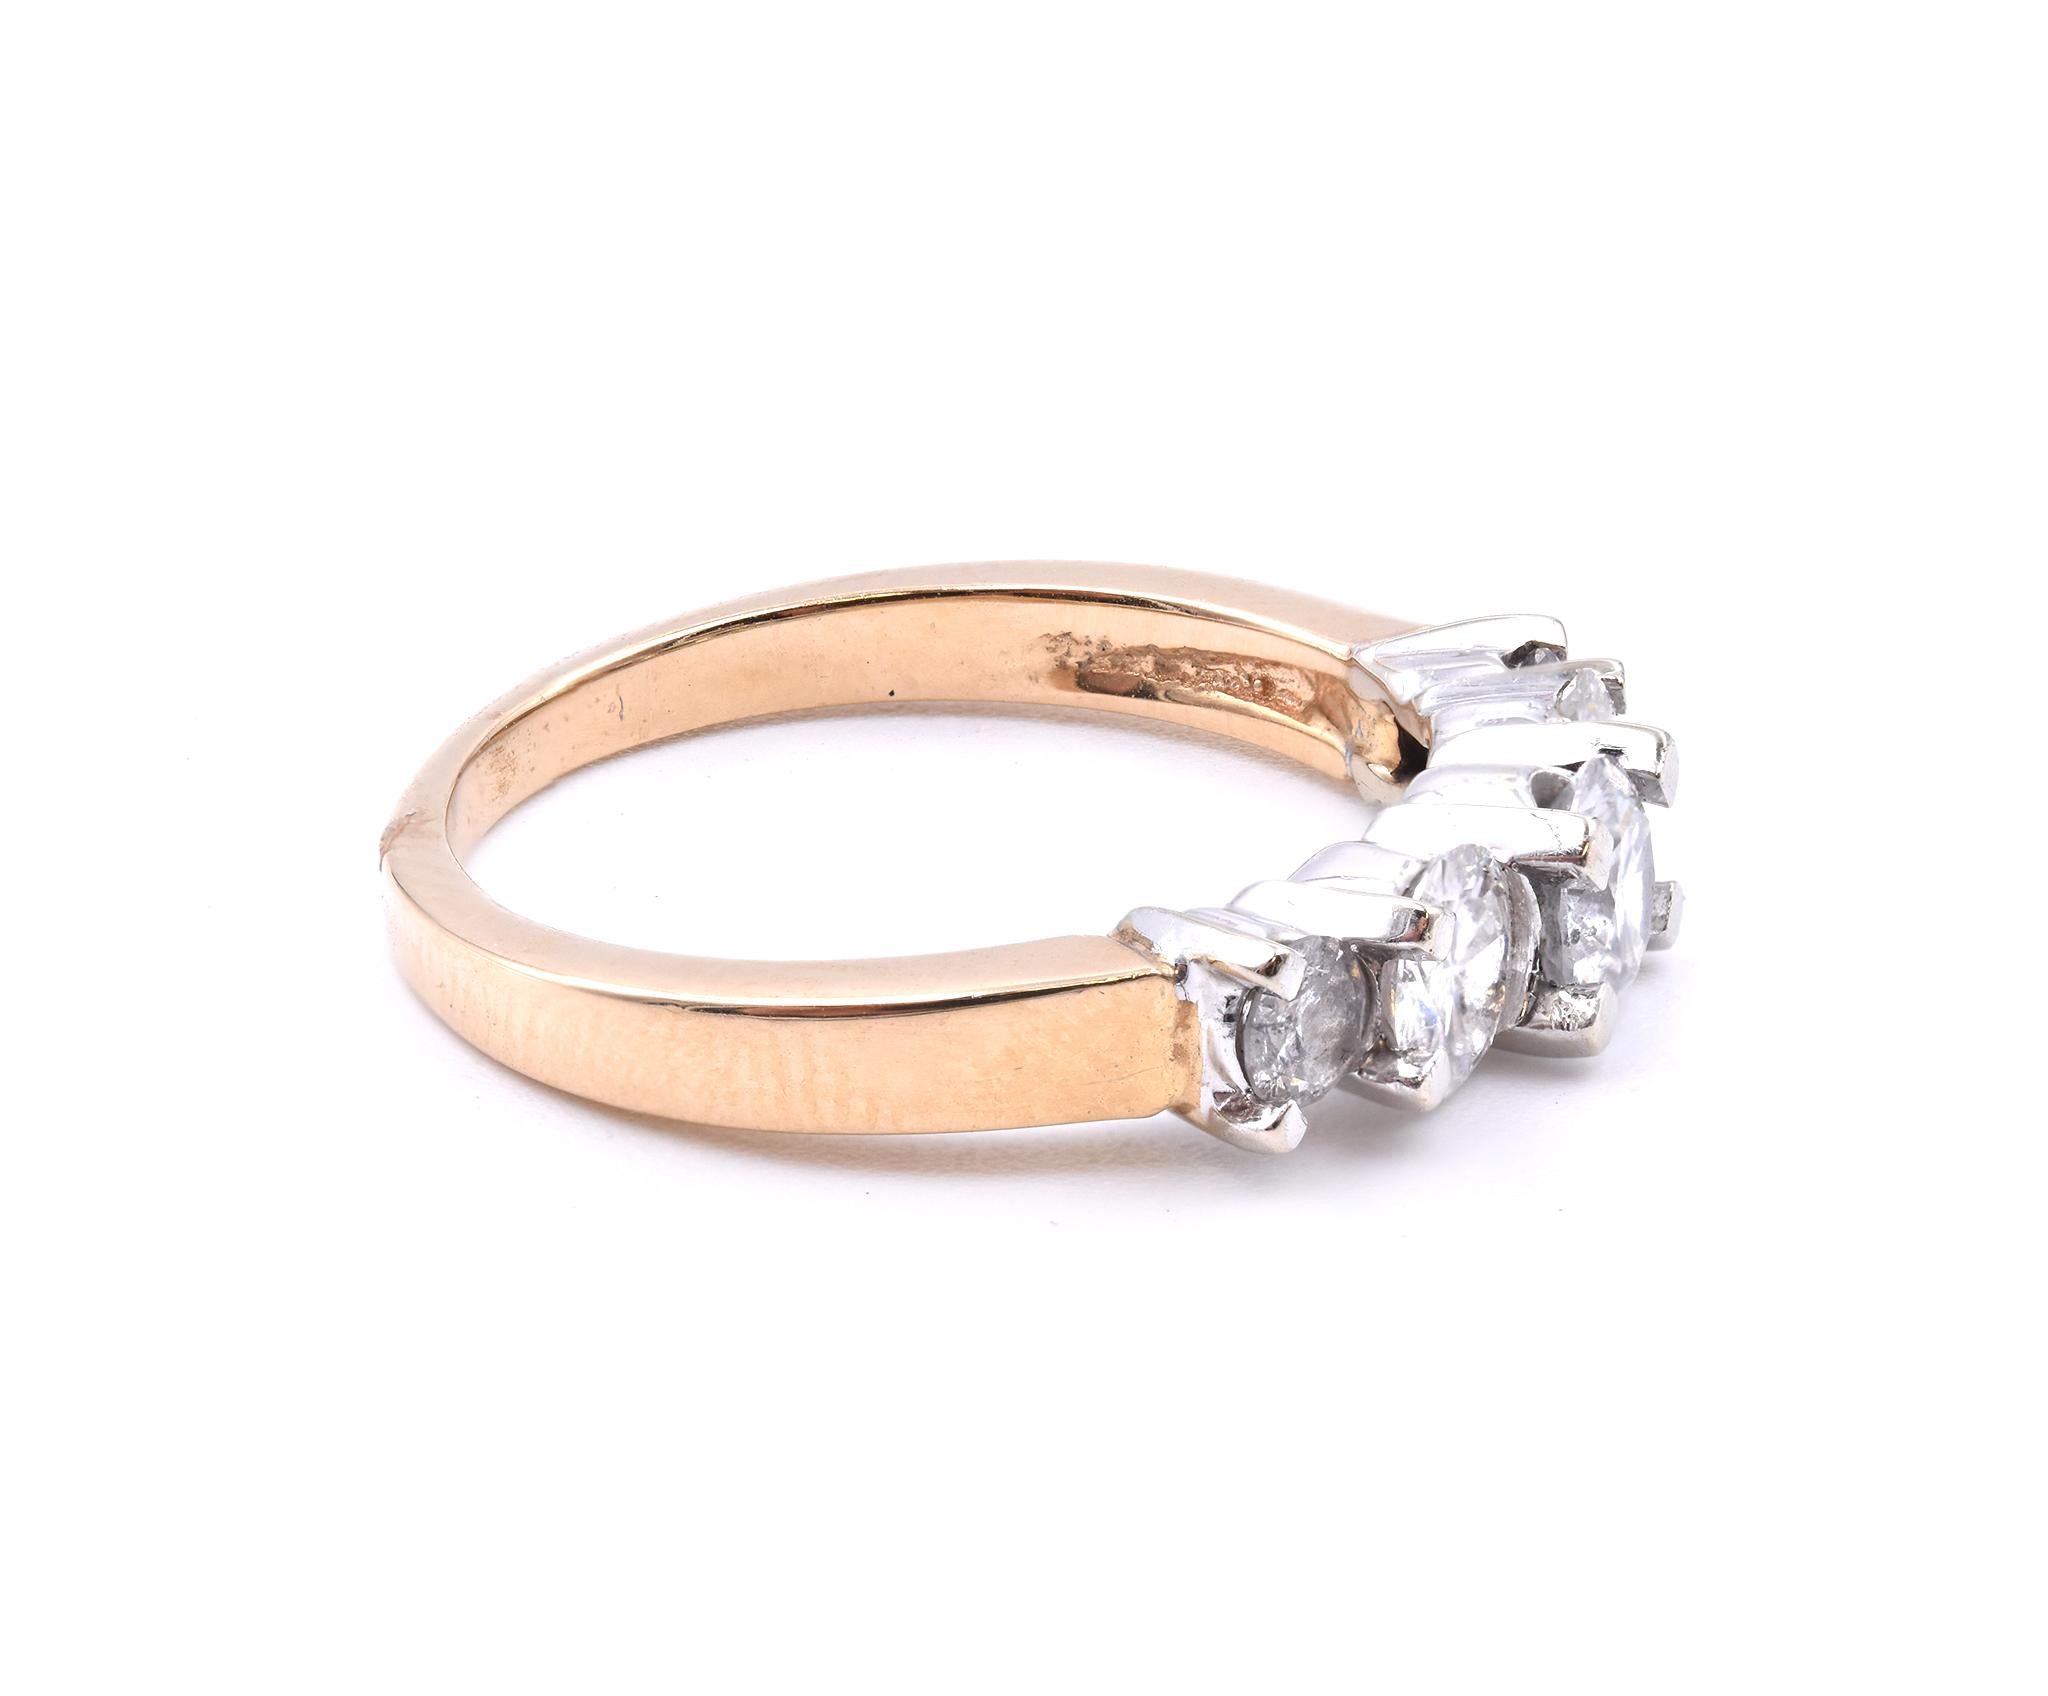 Designer: custom
Material: 14k yellow gold
Diamonds: 5 round brilliant cut = 1.00cttw
Color: H
Clarity: I1
Size: 6 ½  (please allow two additional shipping days for sizing requests)
Dimensions: band measures 2.63mm in width
Weight: 3.20 grams